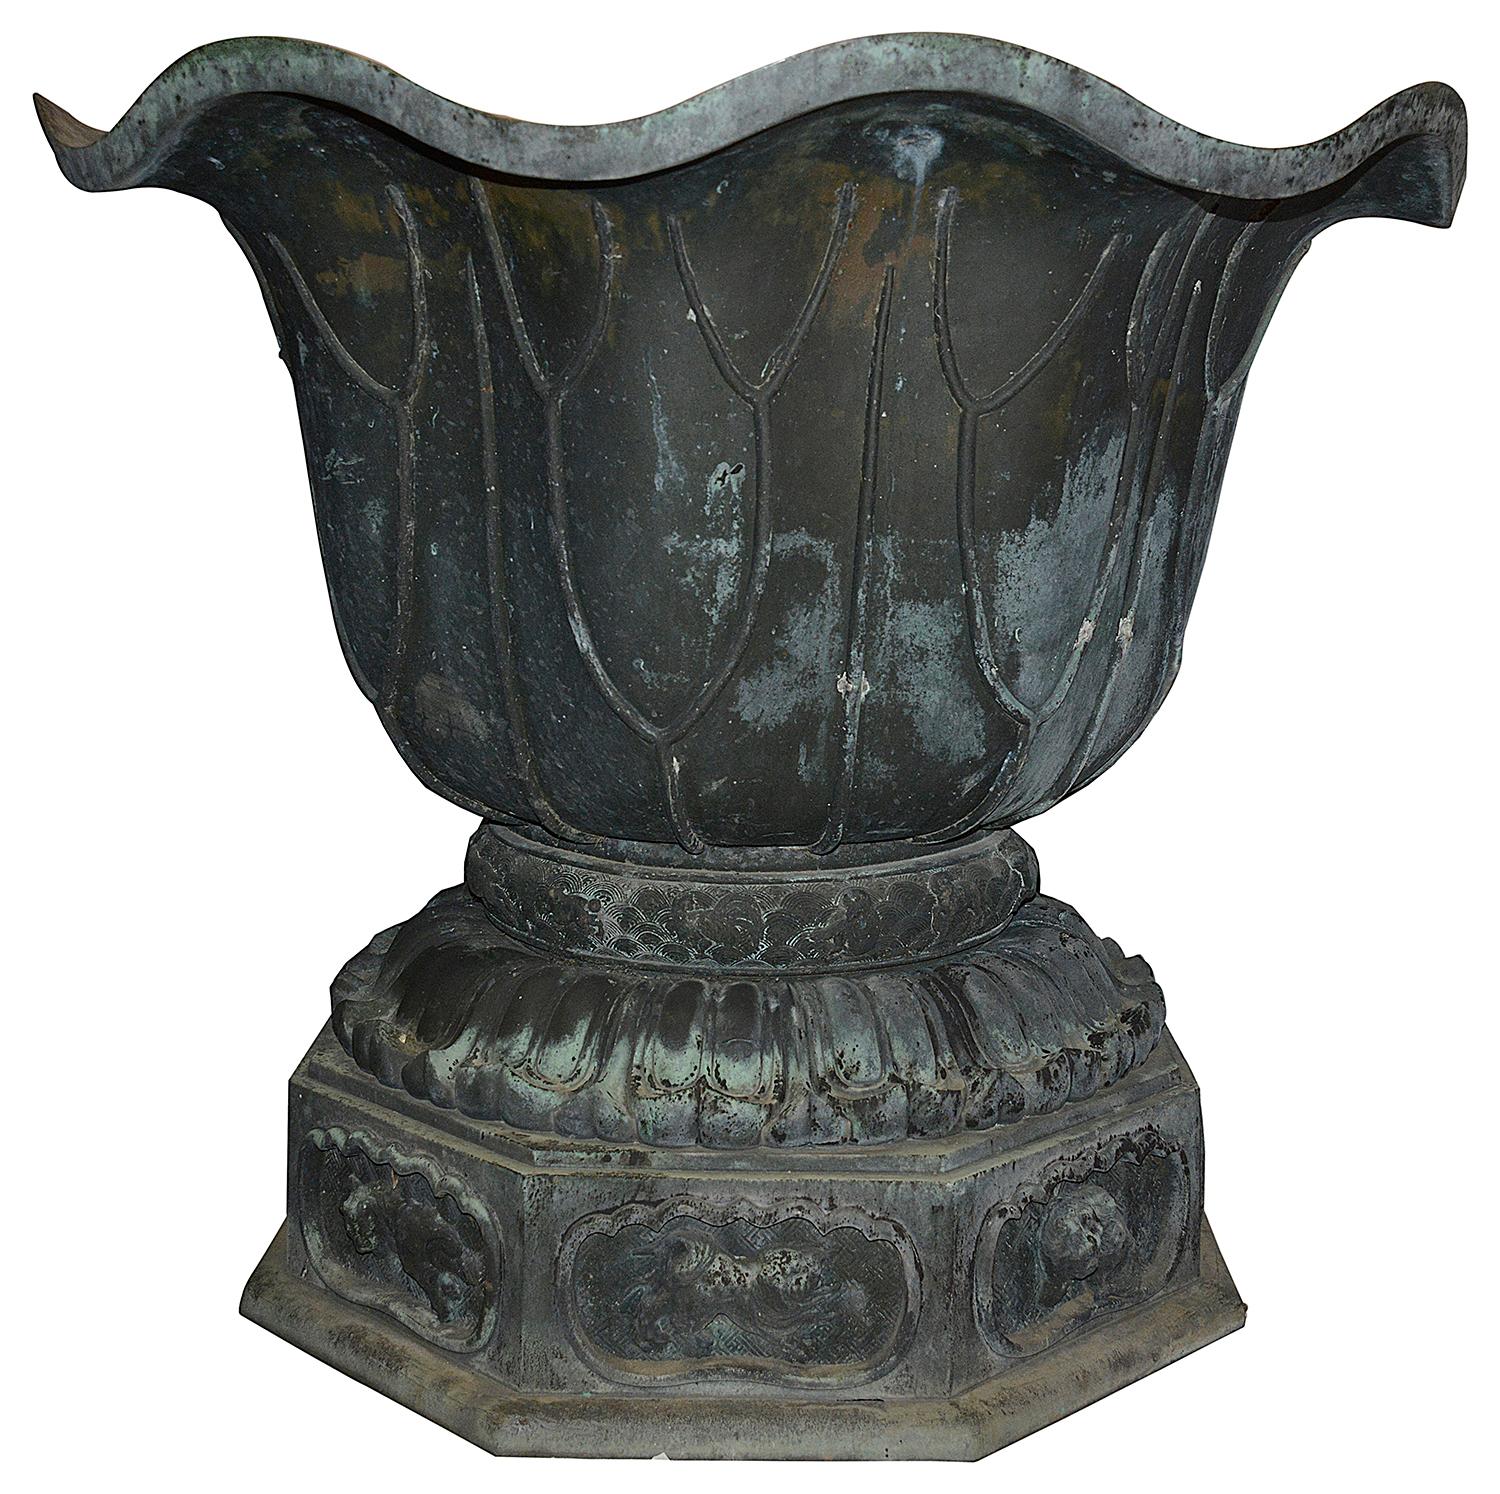 This is a rare and unique piece of Japanese verdigris bronze art. 
Meiji period (1868-1912) The sheer size, condition and unusual design in the form of a huge Lotus leaf, creating this planter that can be used in an indoor setting, terrace or